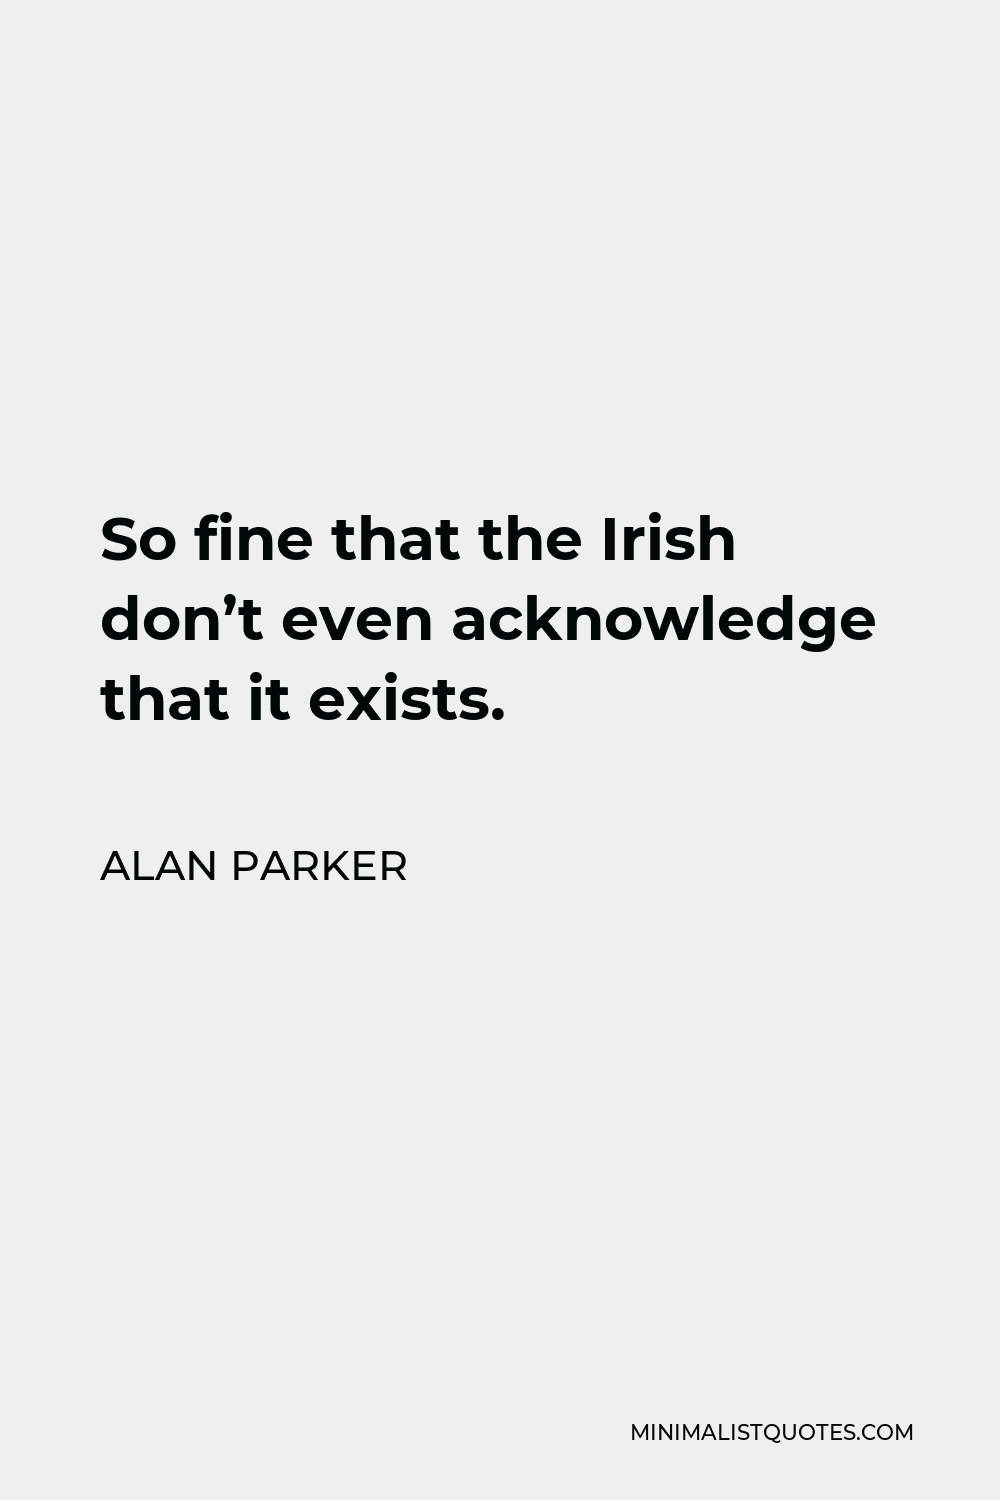 Alan Parker Quote - So fine that the Irish don’t even acknowledge that it exists.